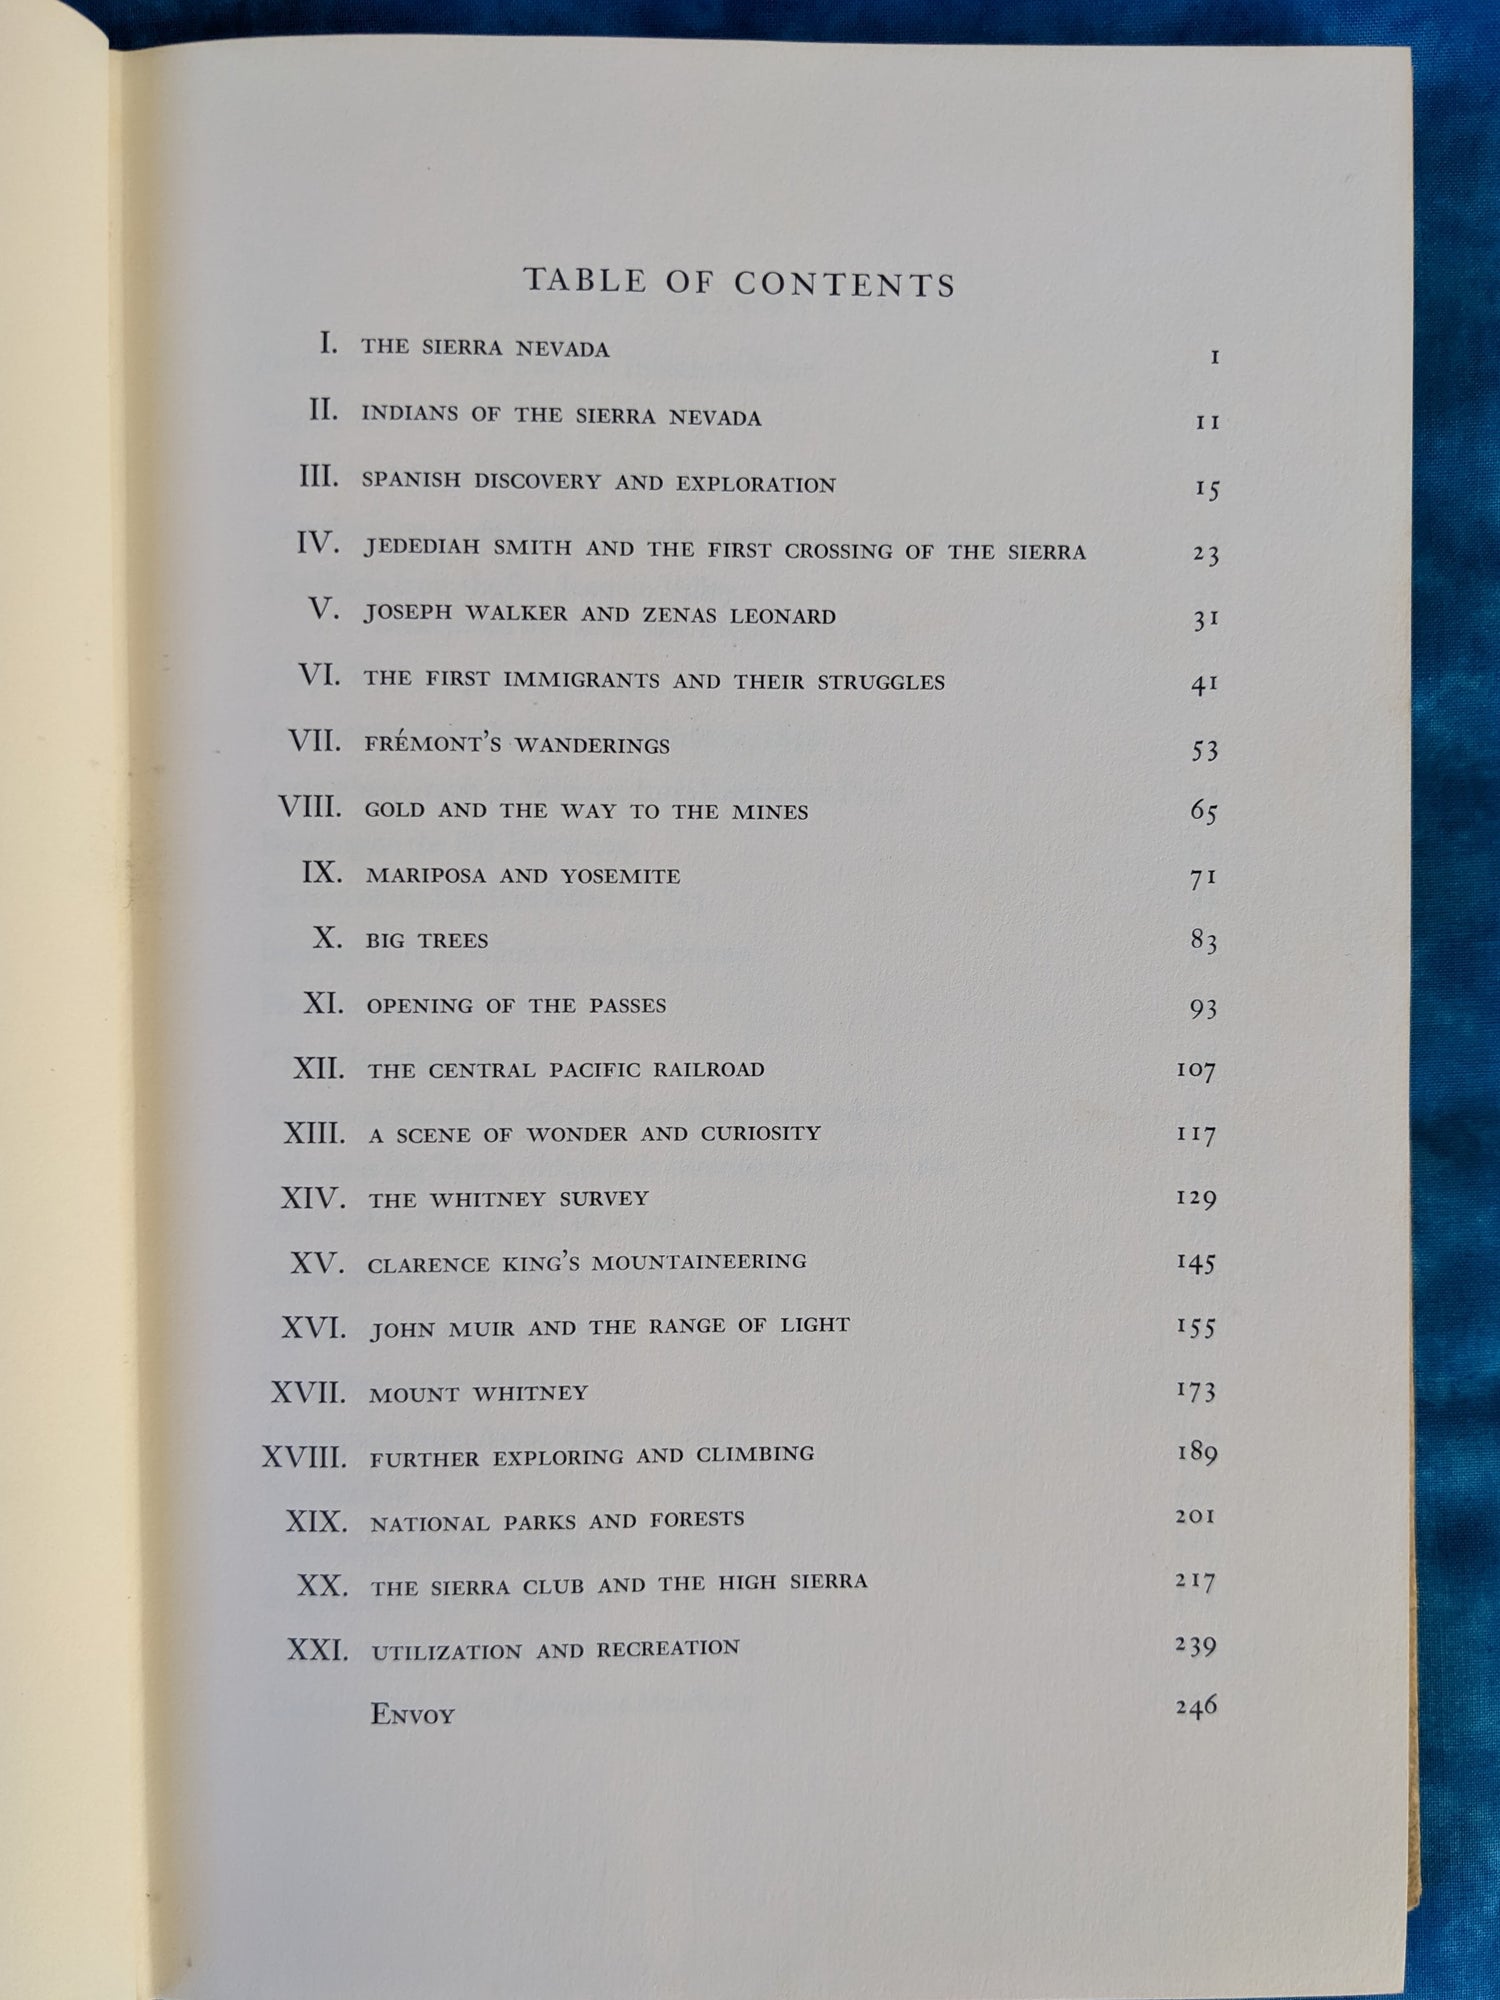 History of the Sierra Nevada vintage book contents page